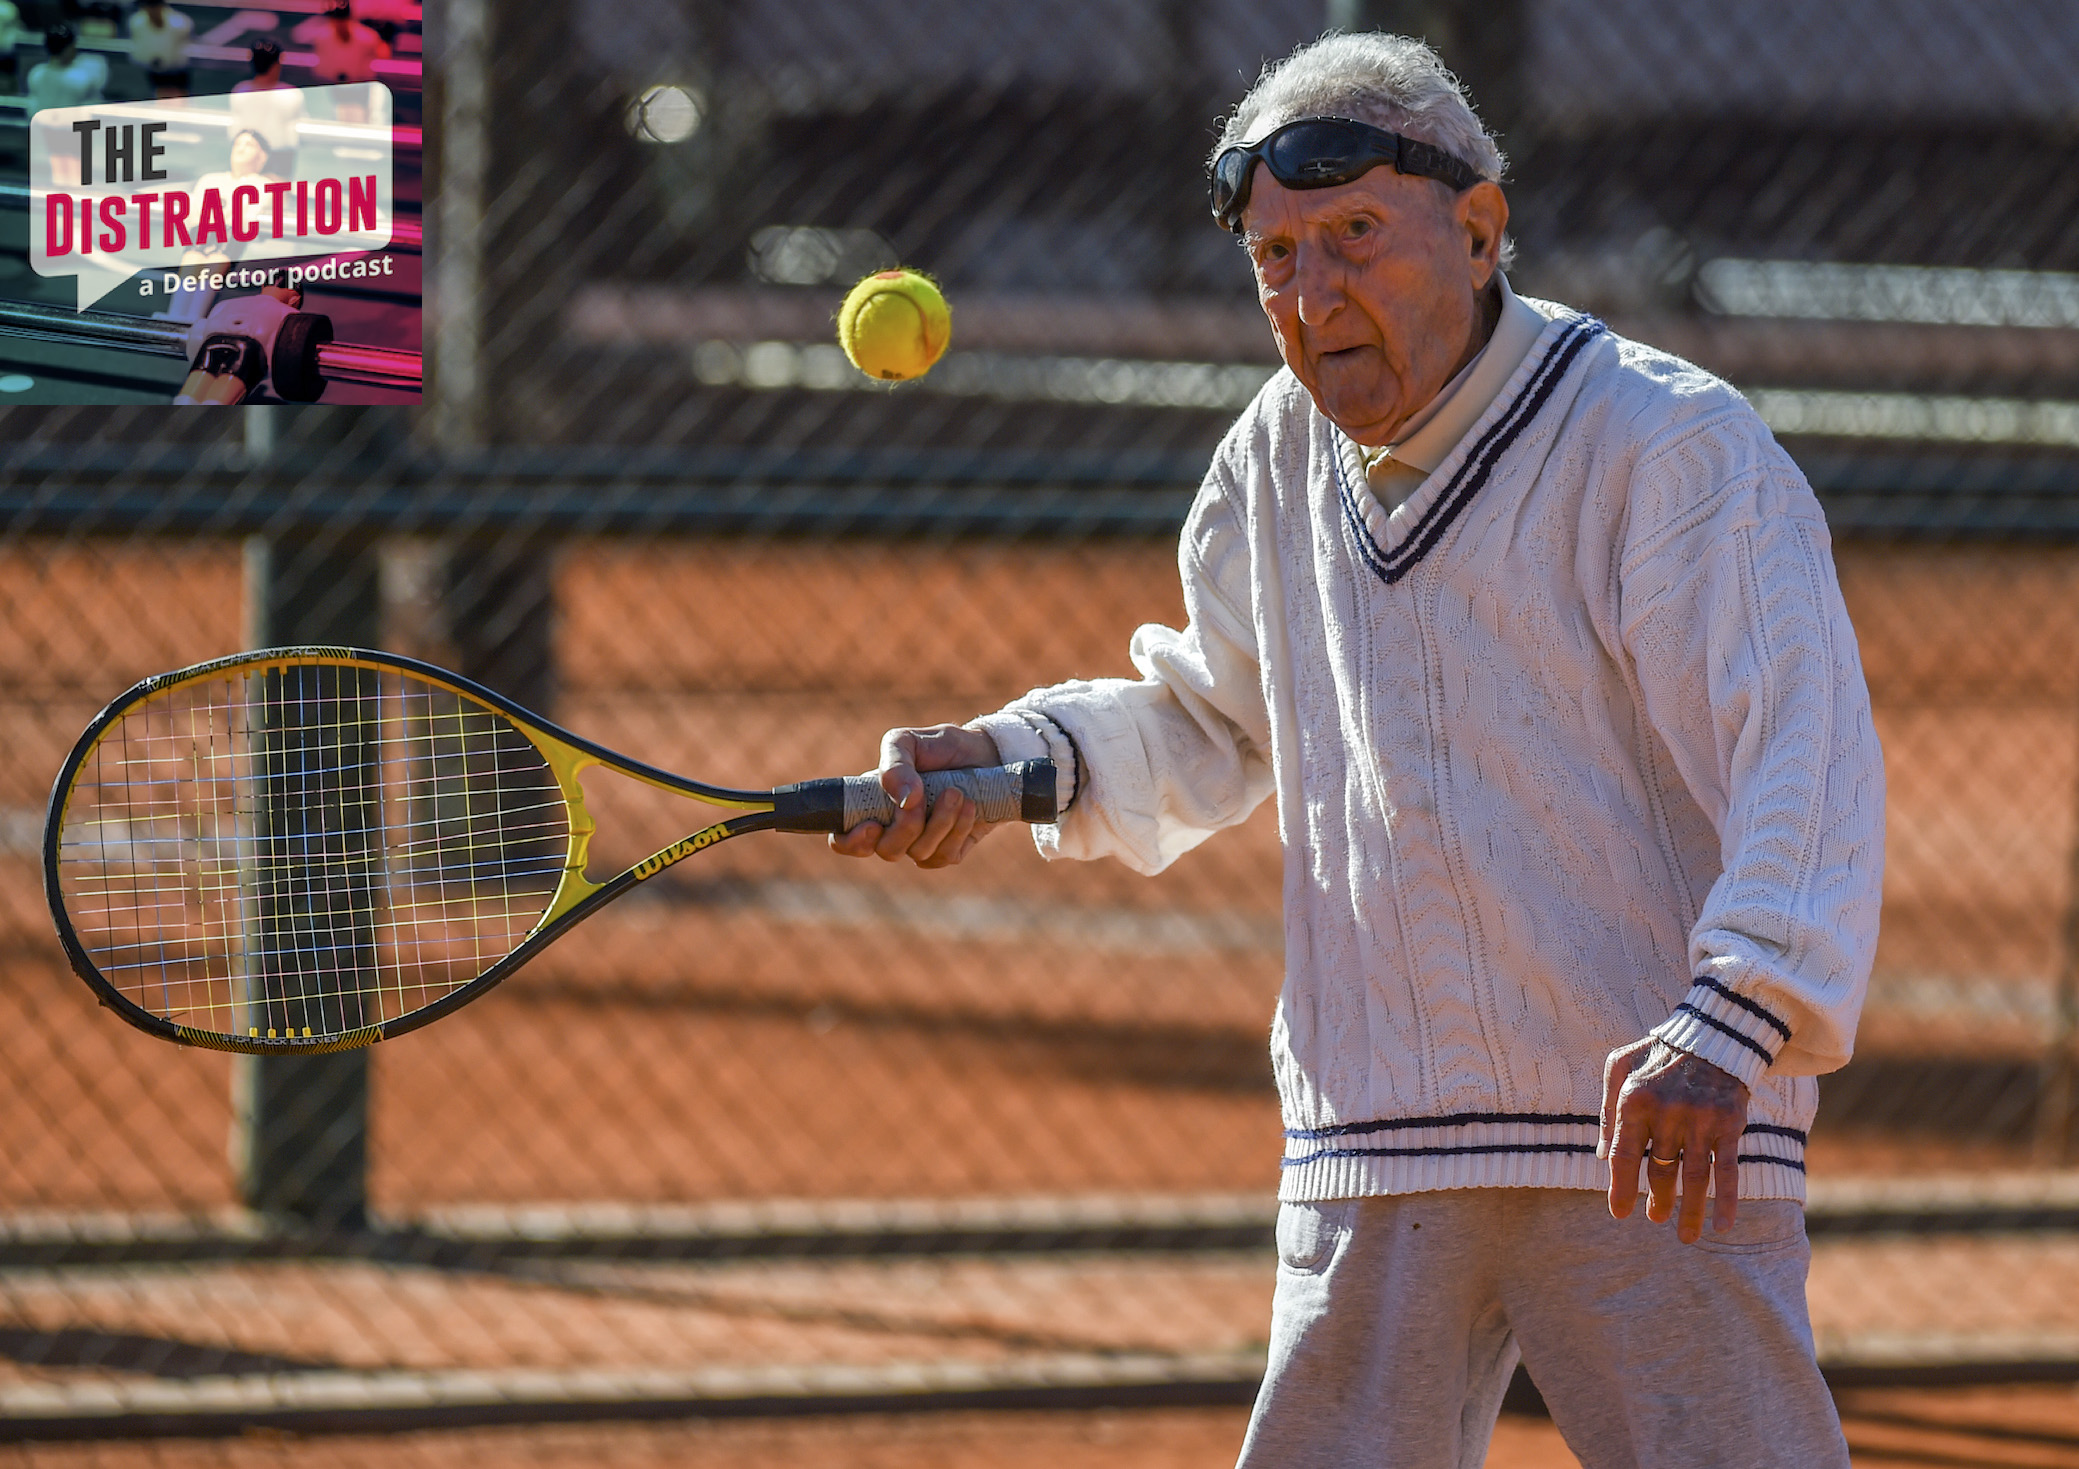 Armenian-born Argentine 100-year-old Artyn Elmayan plays tennis in Buenos Aires in 2017. The reason this image is on here is that this is our 100th episode.